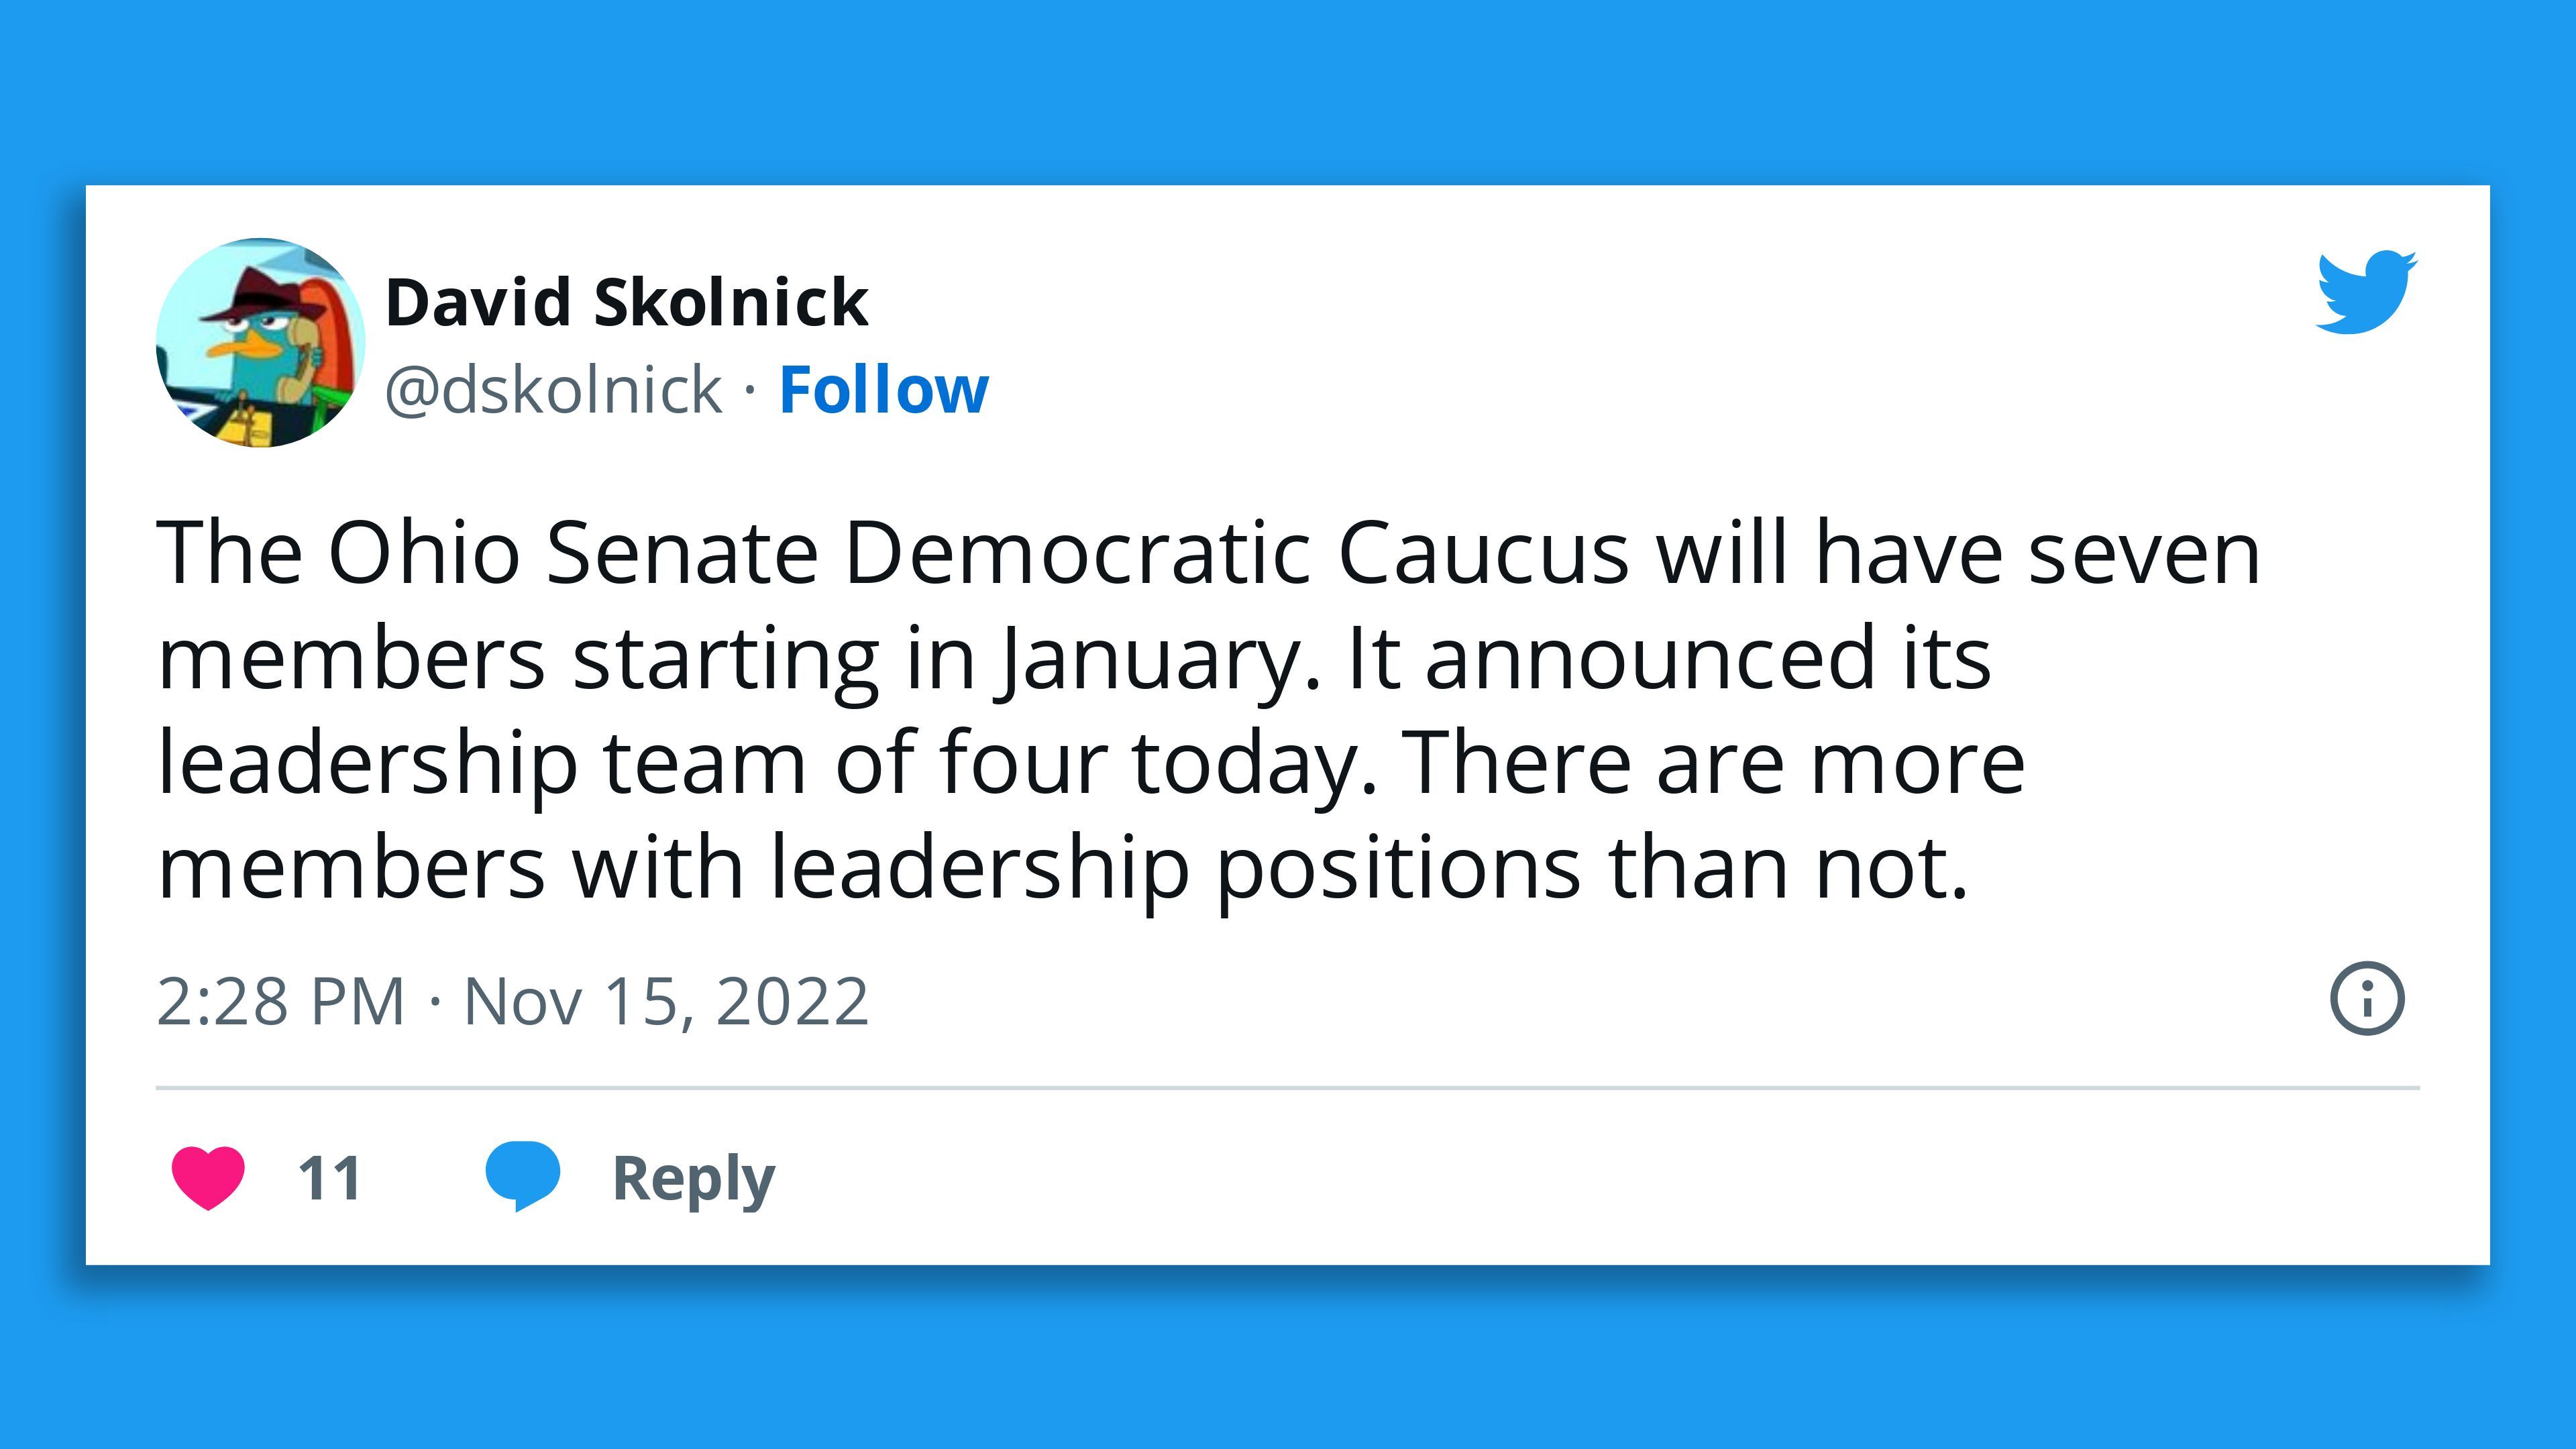 A tweet reading, "The Ohio Senate Democratic Caucus will have seven members starting in January. It announced its leadership team of four today..."